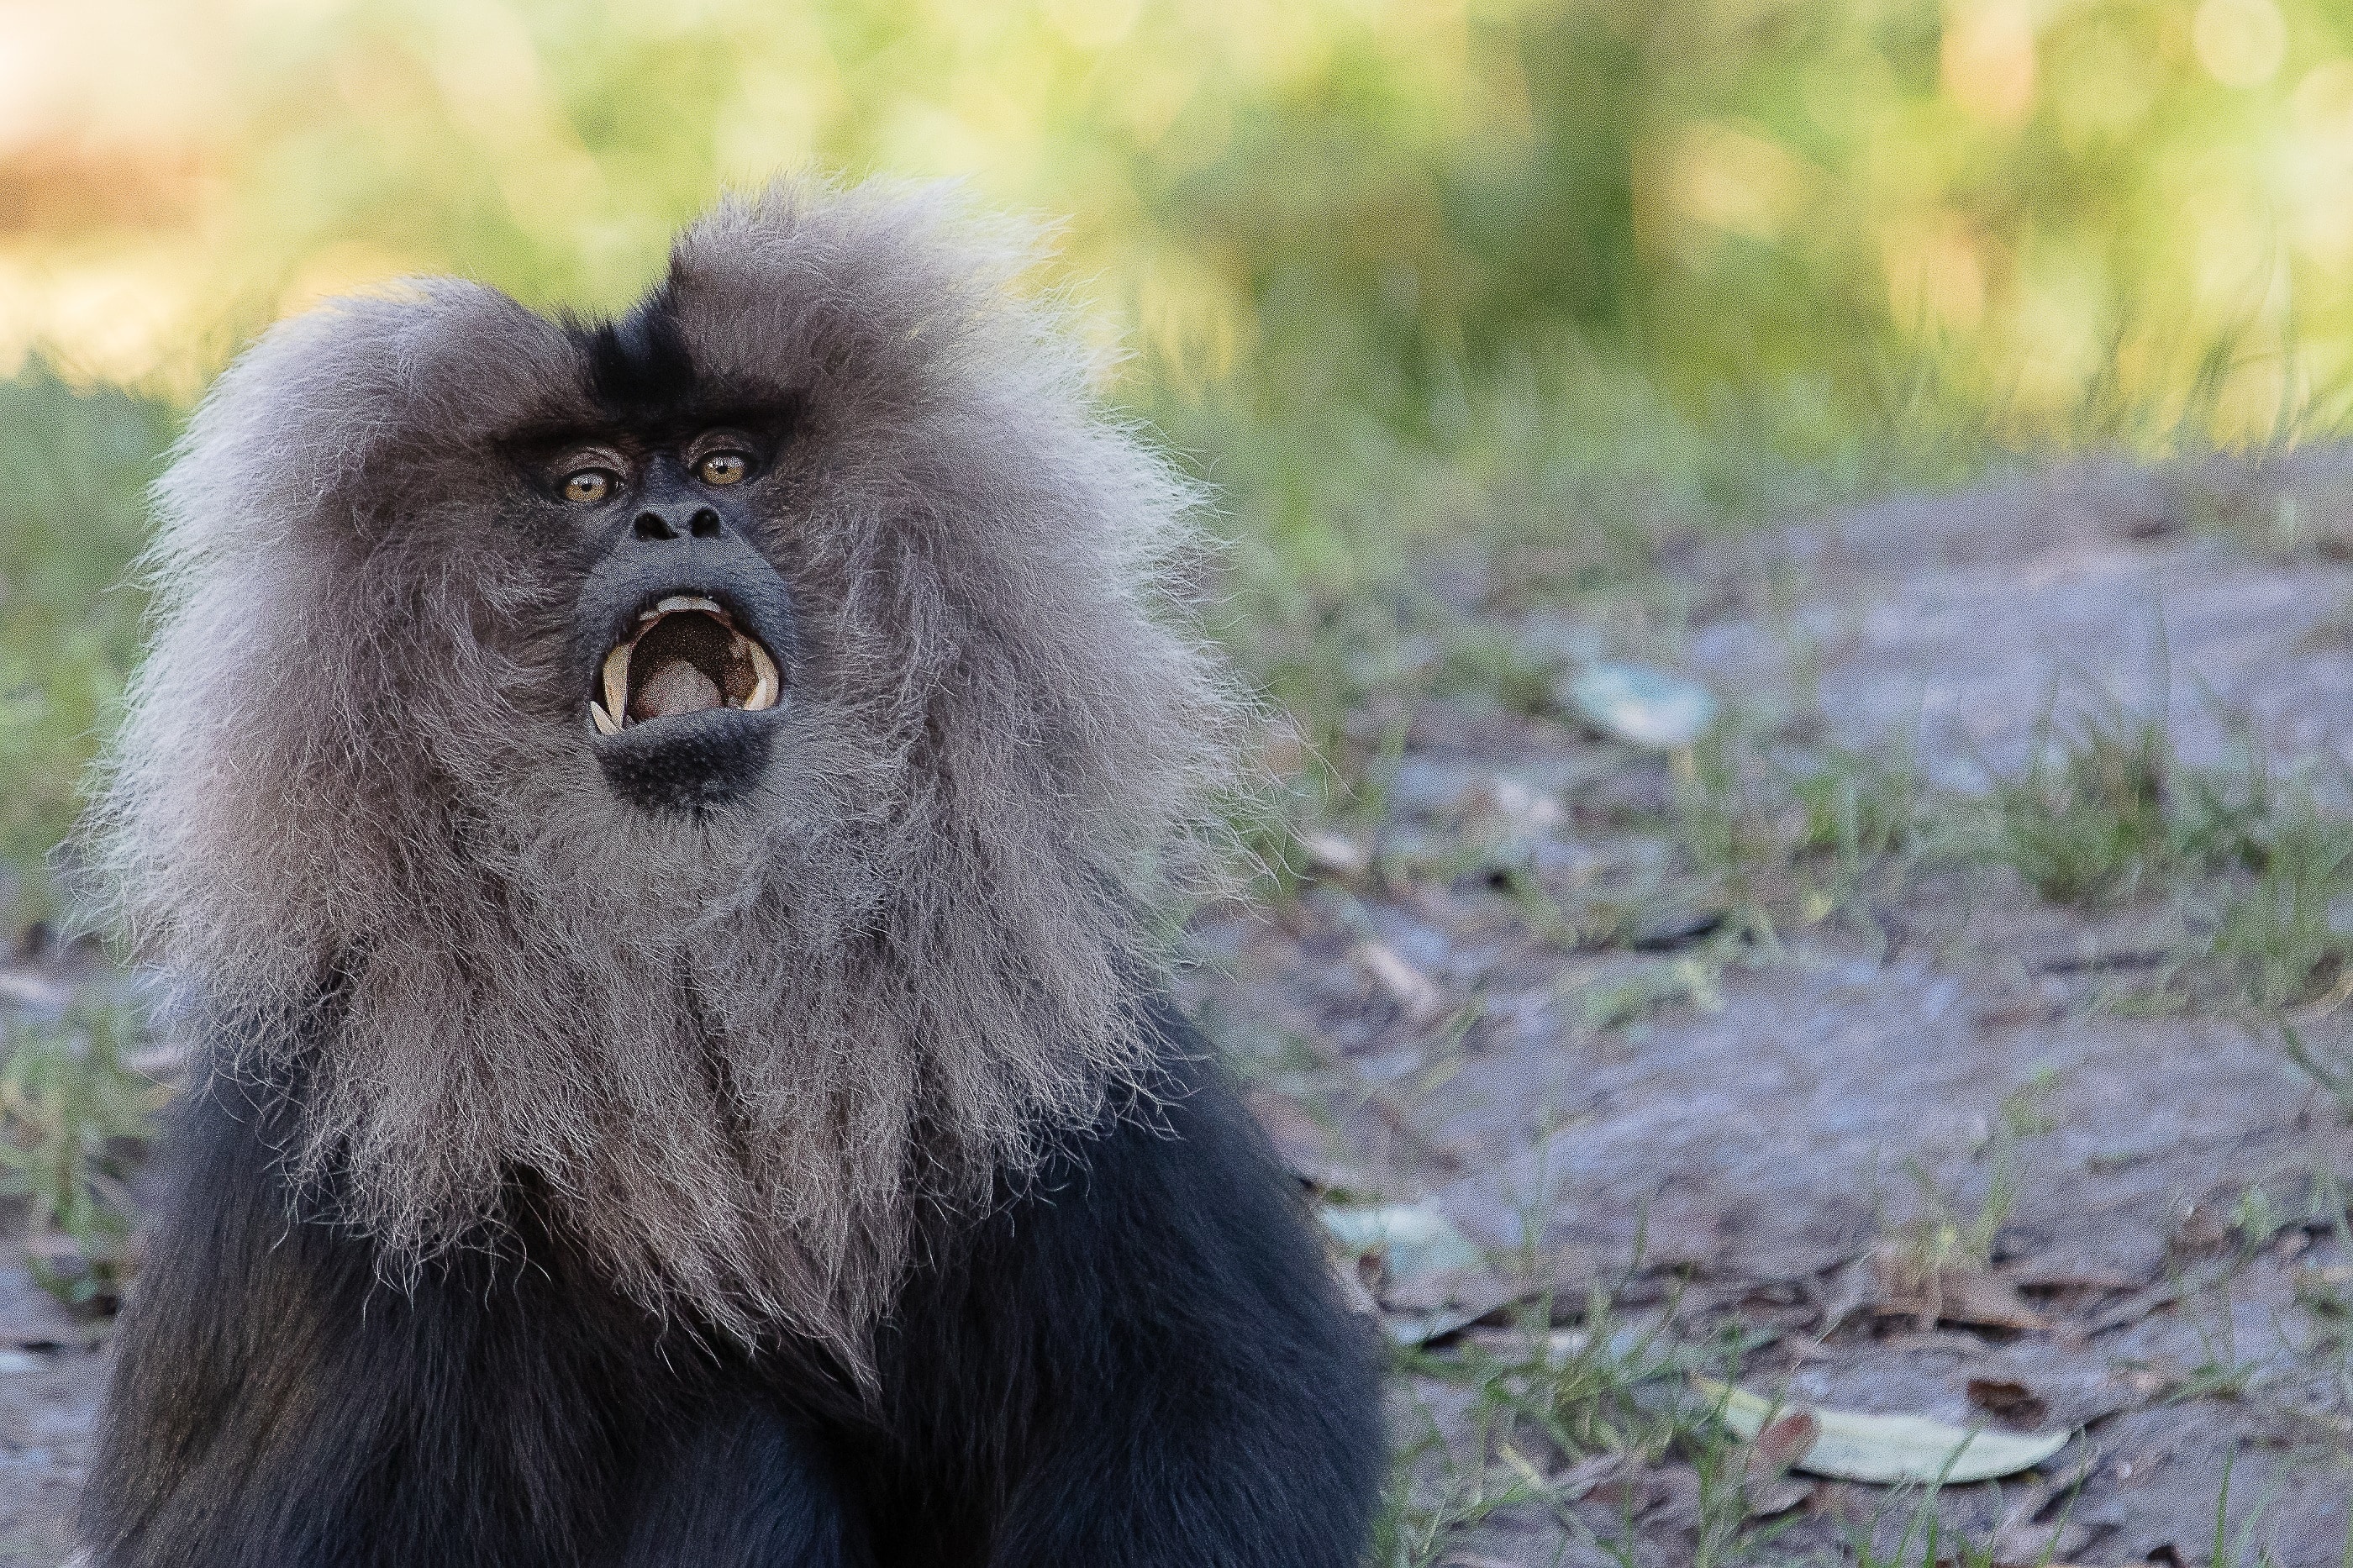 Primate, Lion Tailed Macaque, Monkey, animals in the wild, one animal